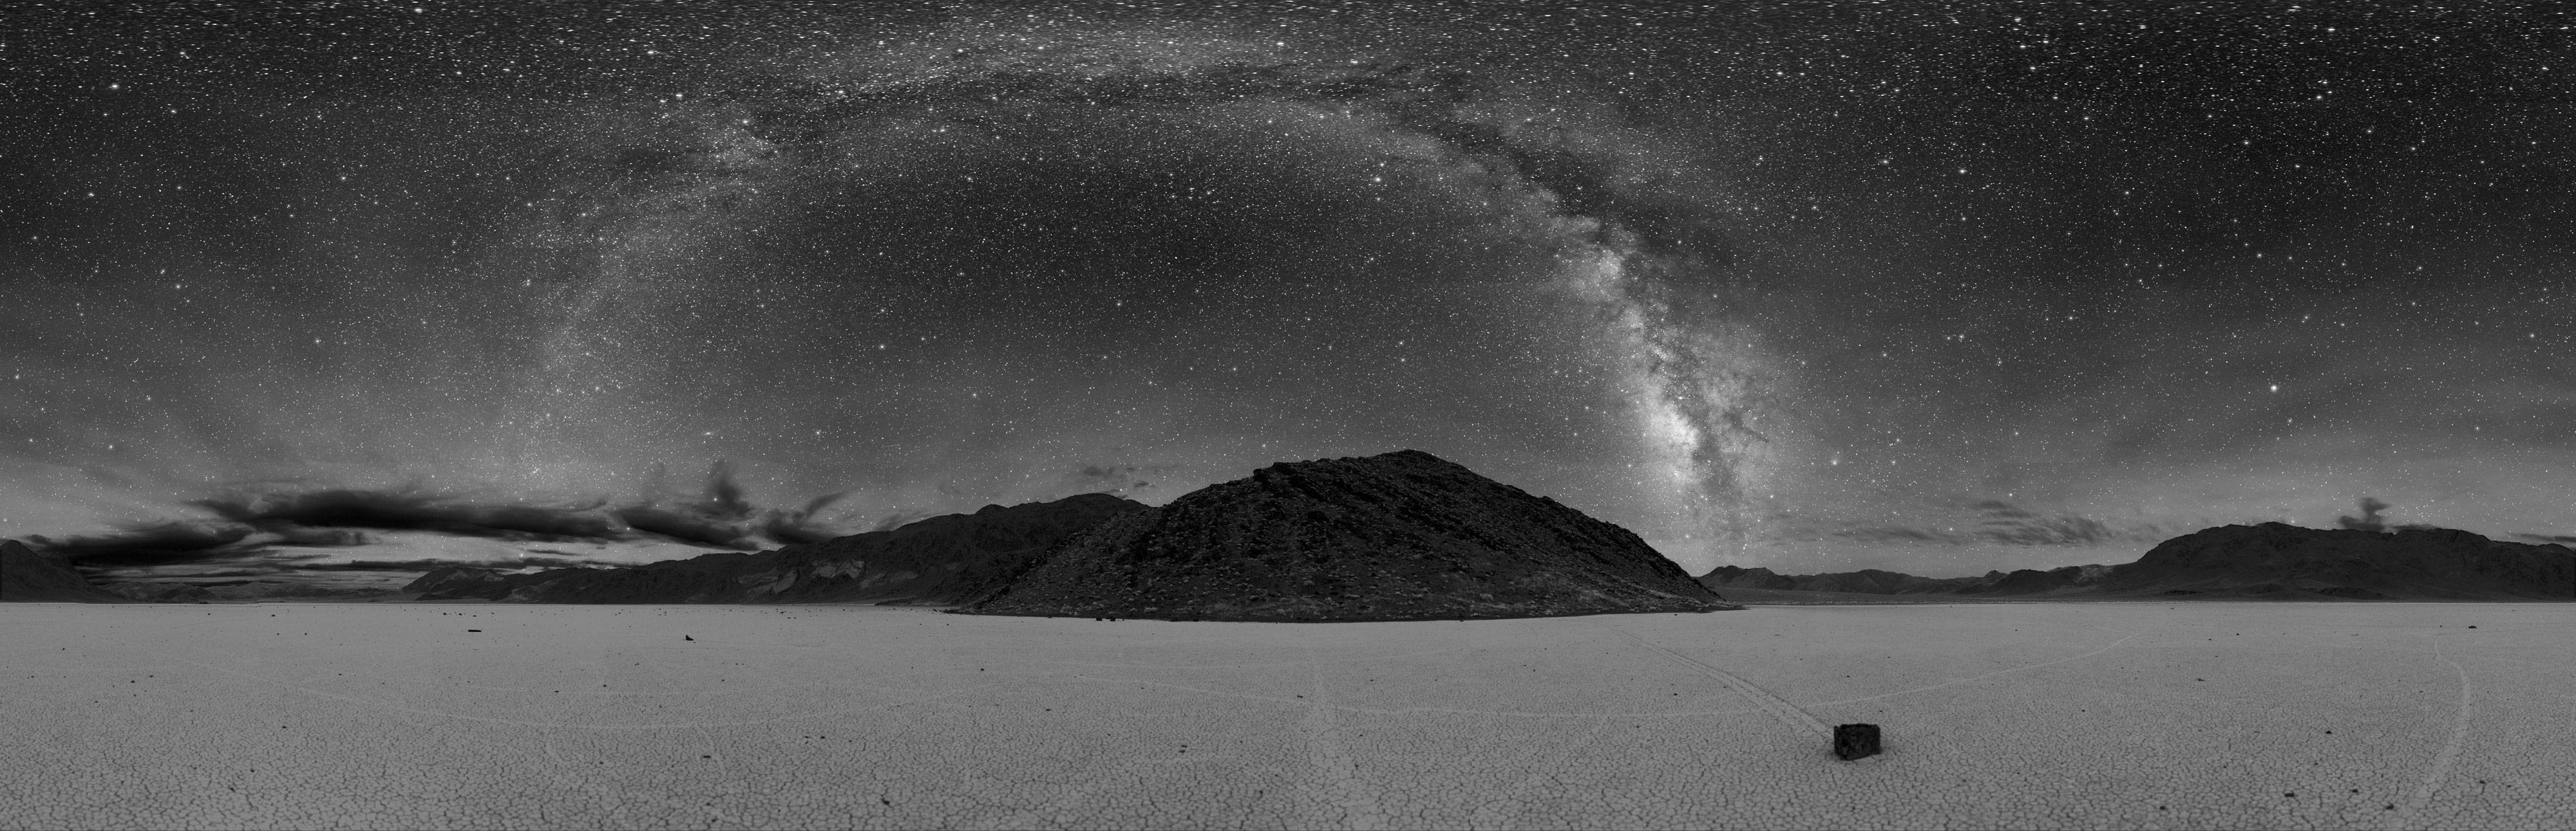 Lonely Yet Beautiful Death Valley Landscapes (40 PICS)